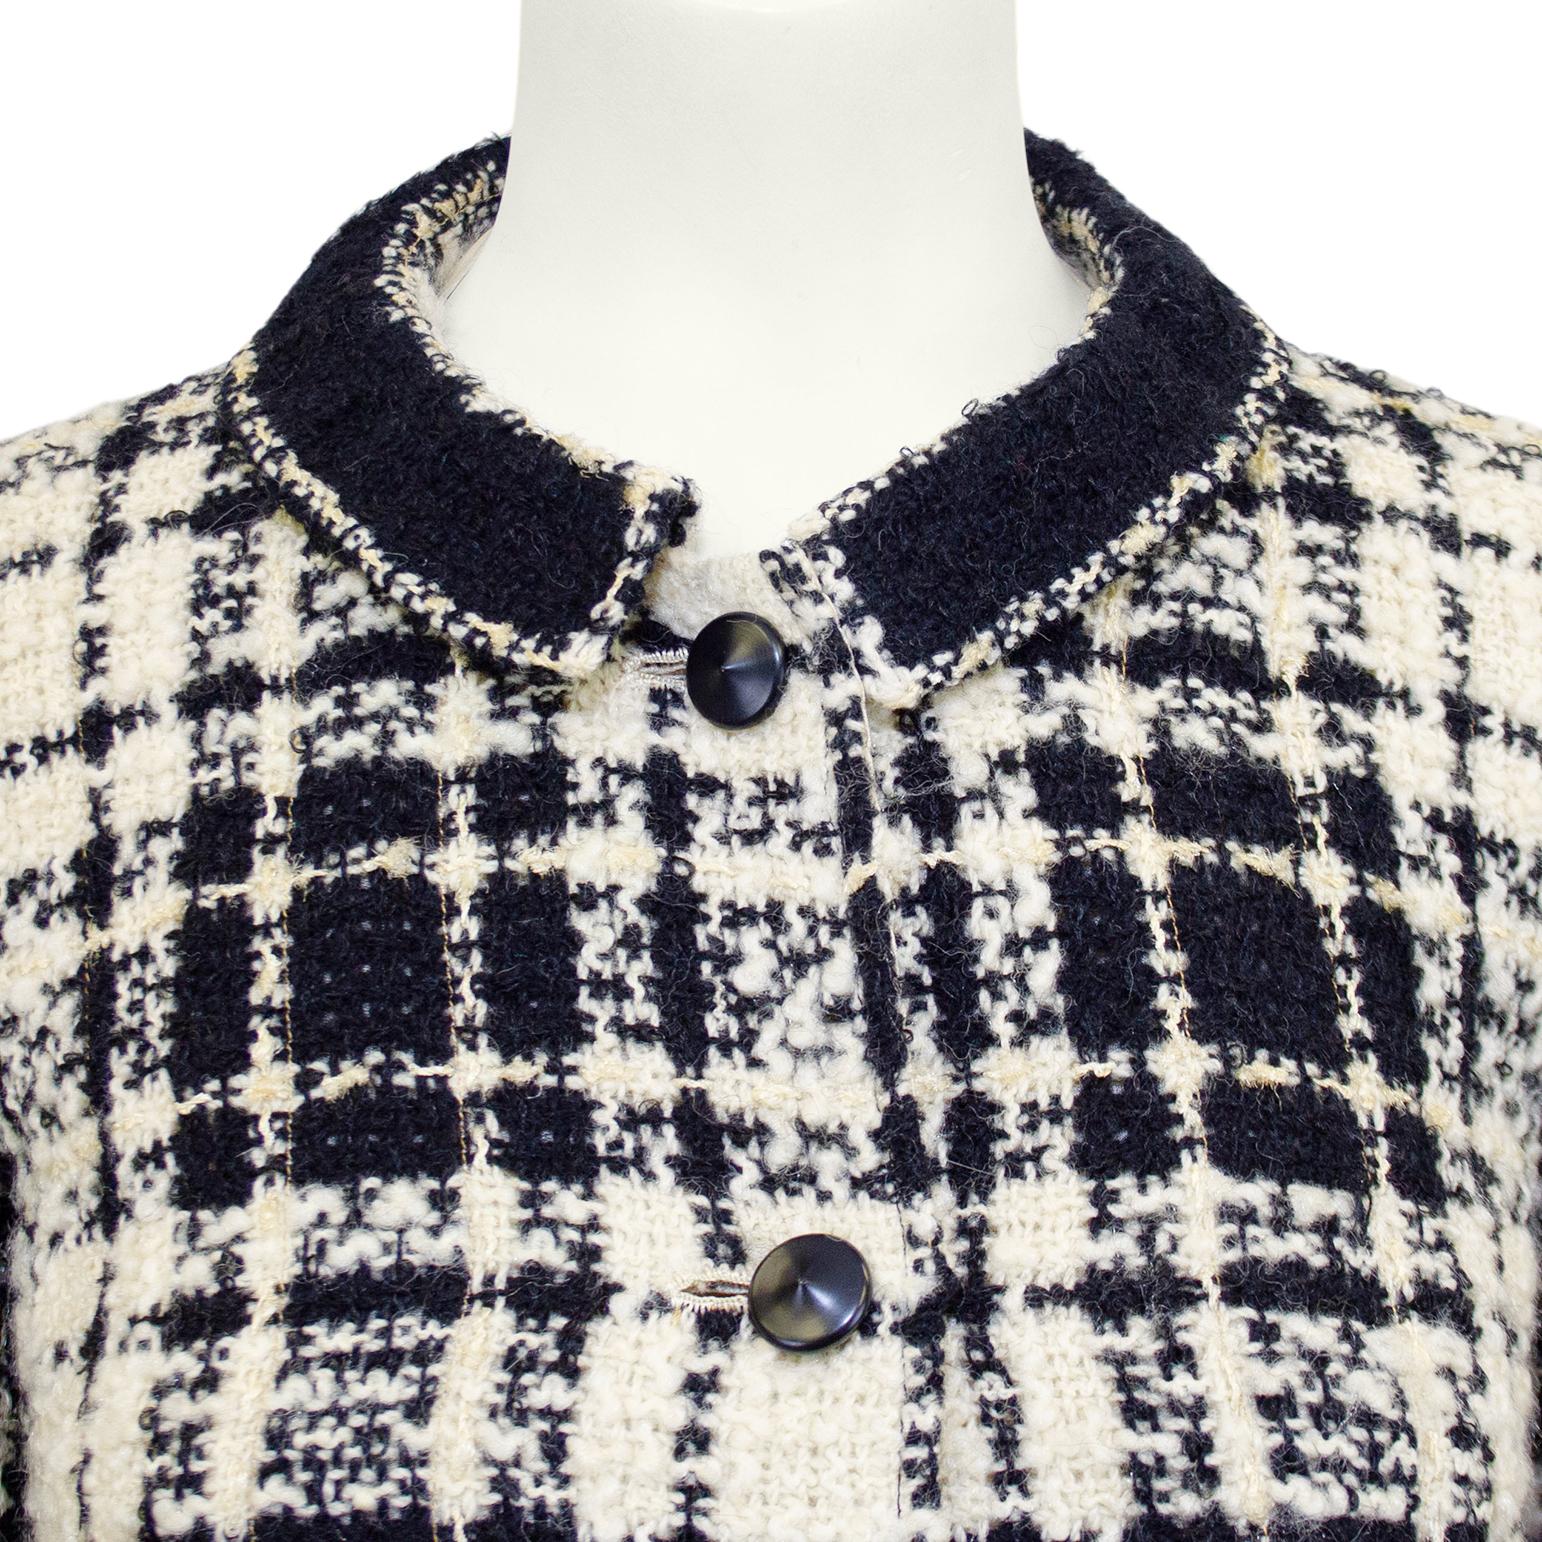 1960s Chanel Haute Couture Black and Cream Tweed Jacket and Dress Ensemble 1